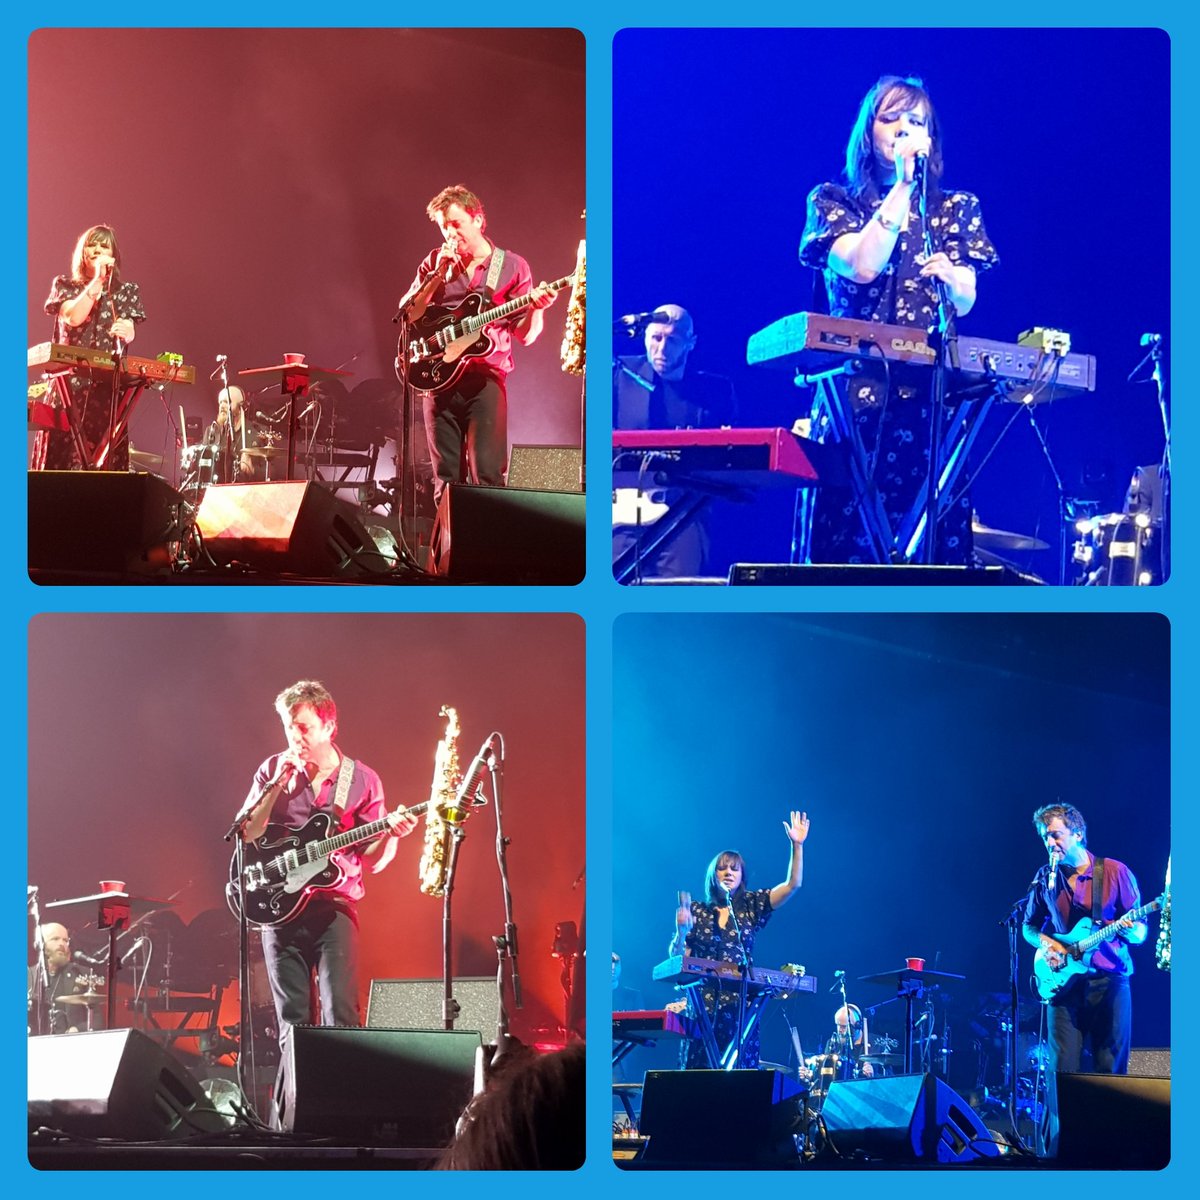 Thank you @The_Waeve @grahamcoxon @RoseDougall you were brilliant in Birmingham last night, loving the new songs 🎸🎶🎷💕